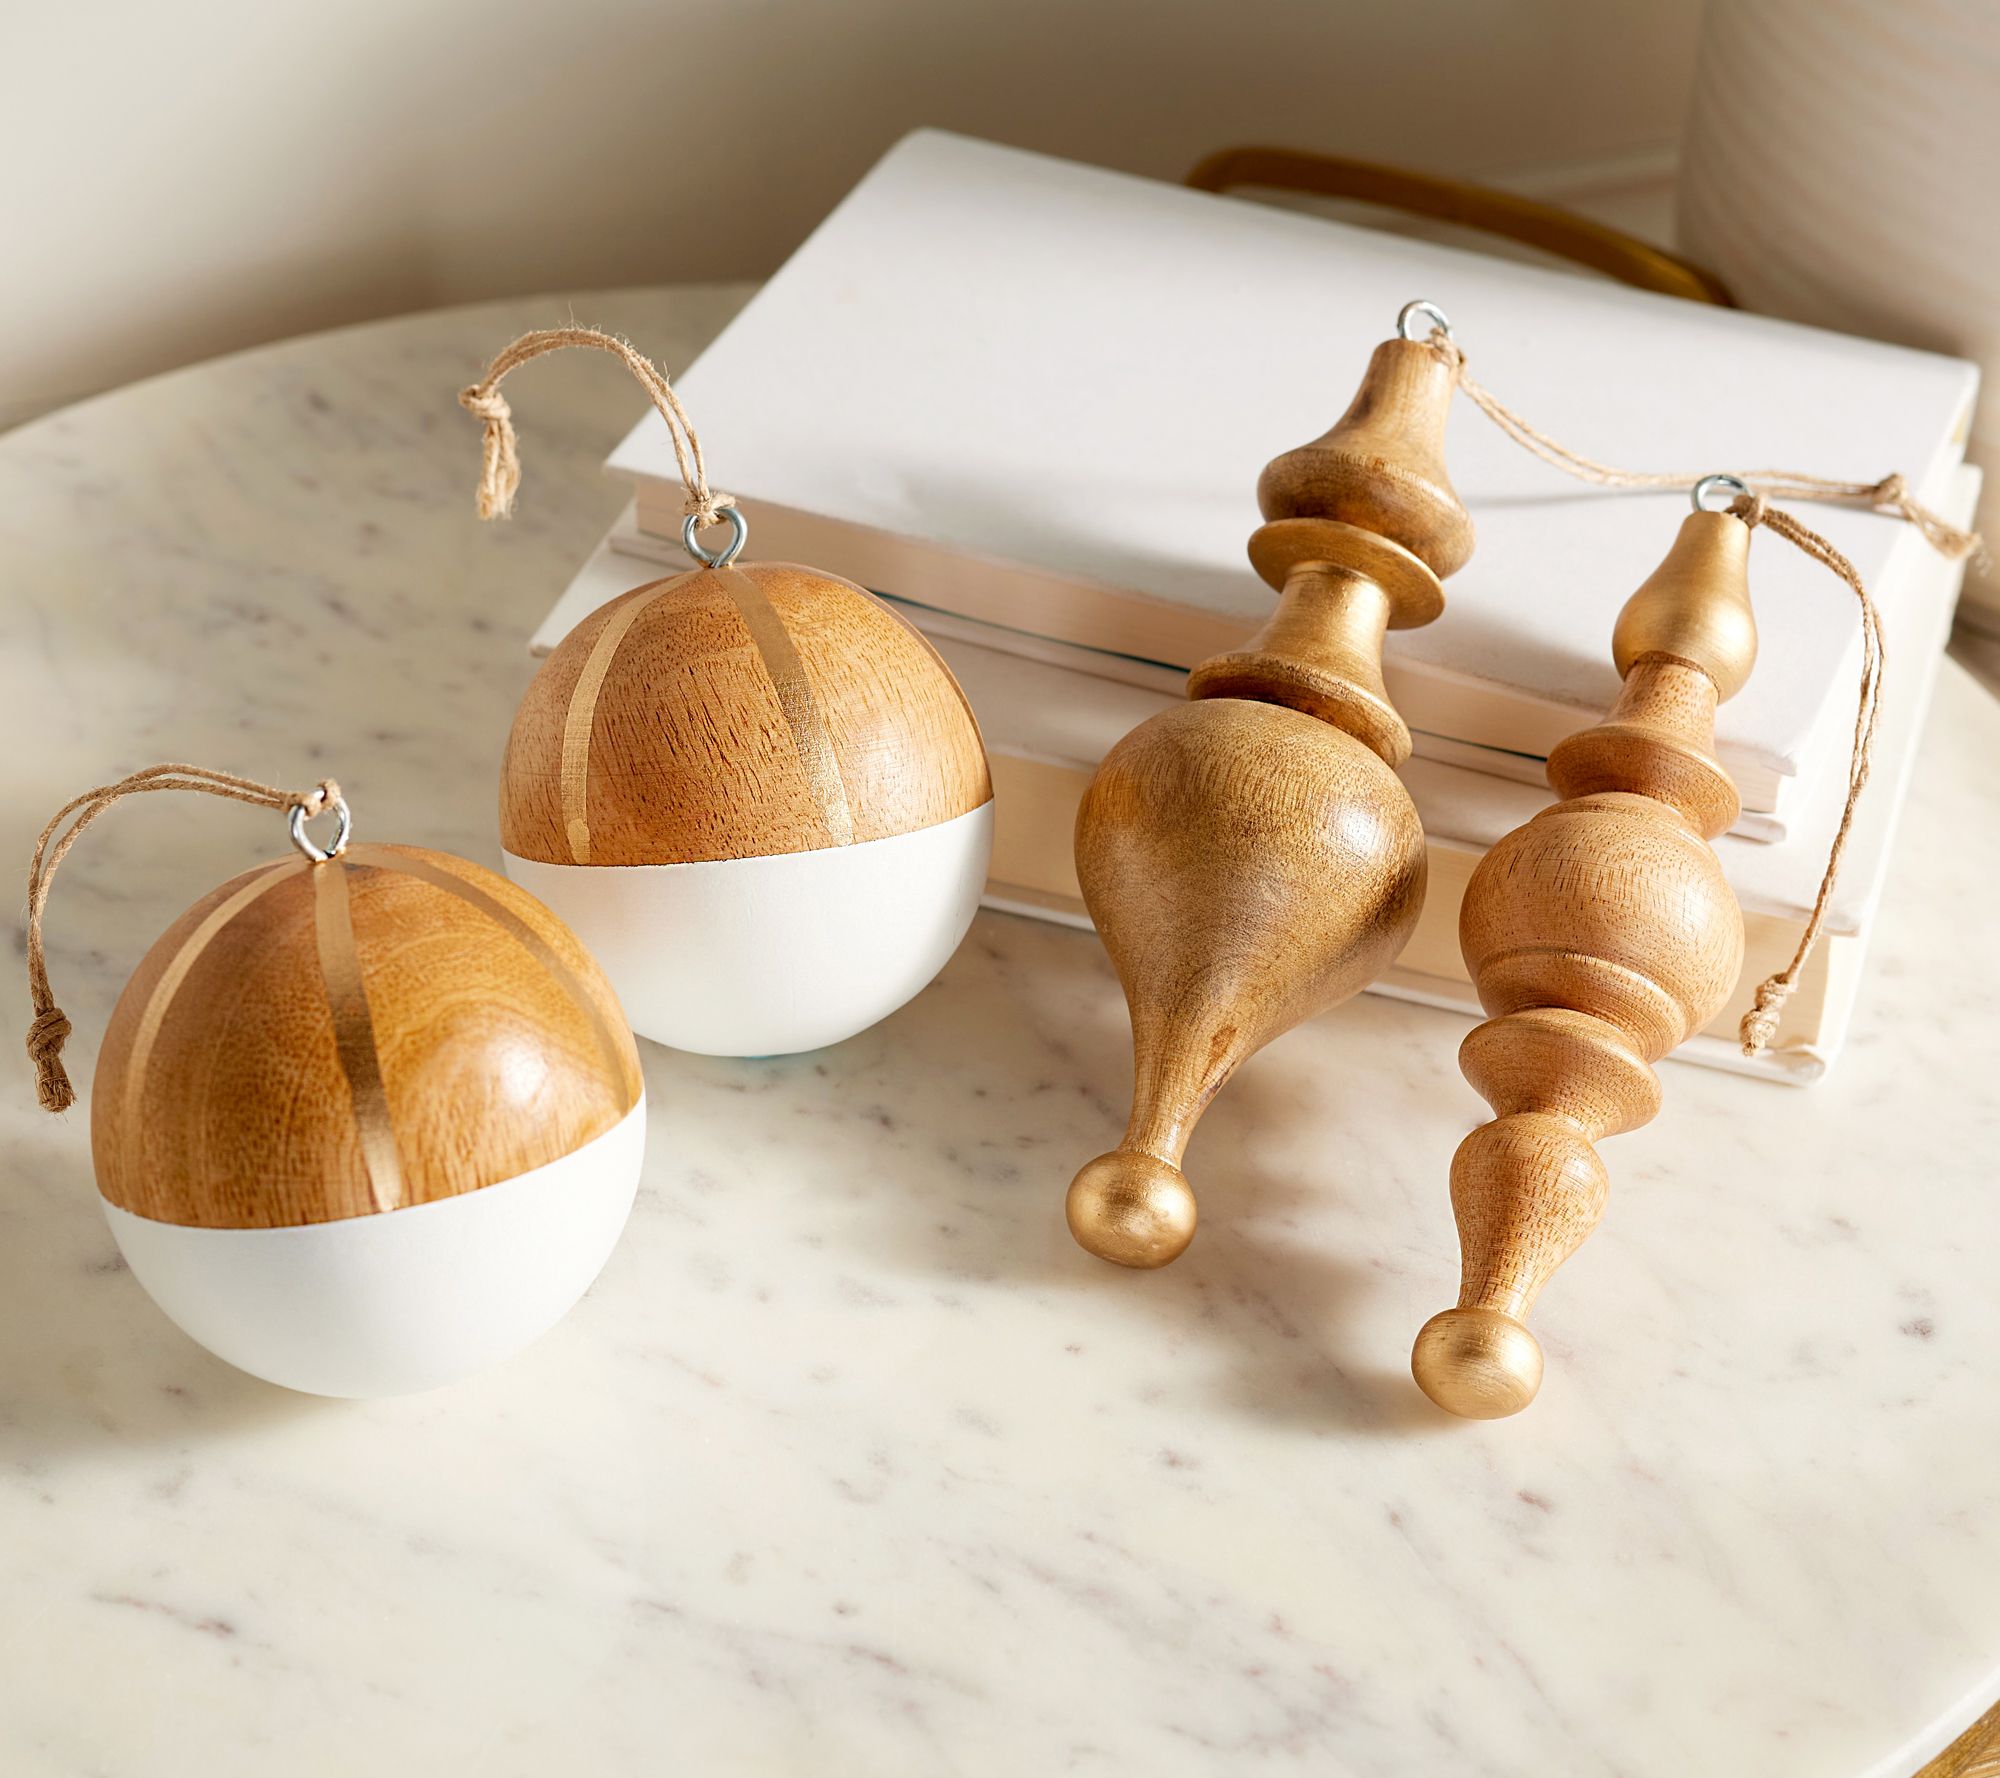 Set of 4 Painted Wooden Ball and Finial Ornaments by Lauren McBride 